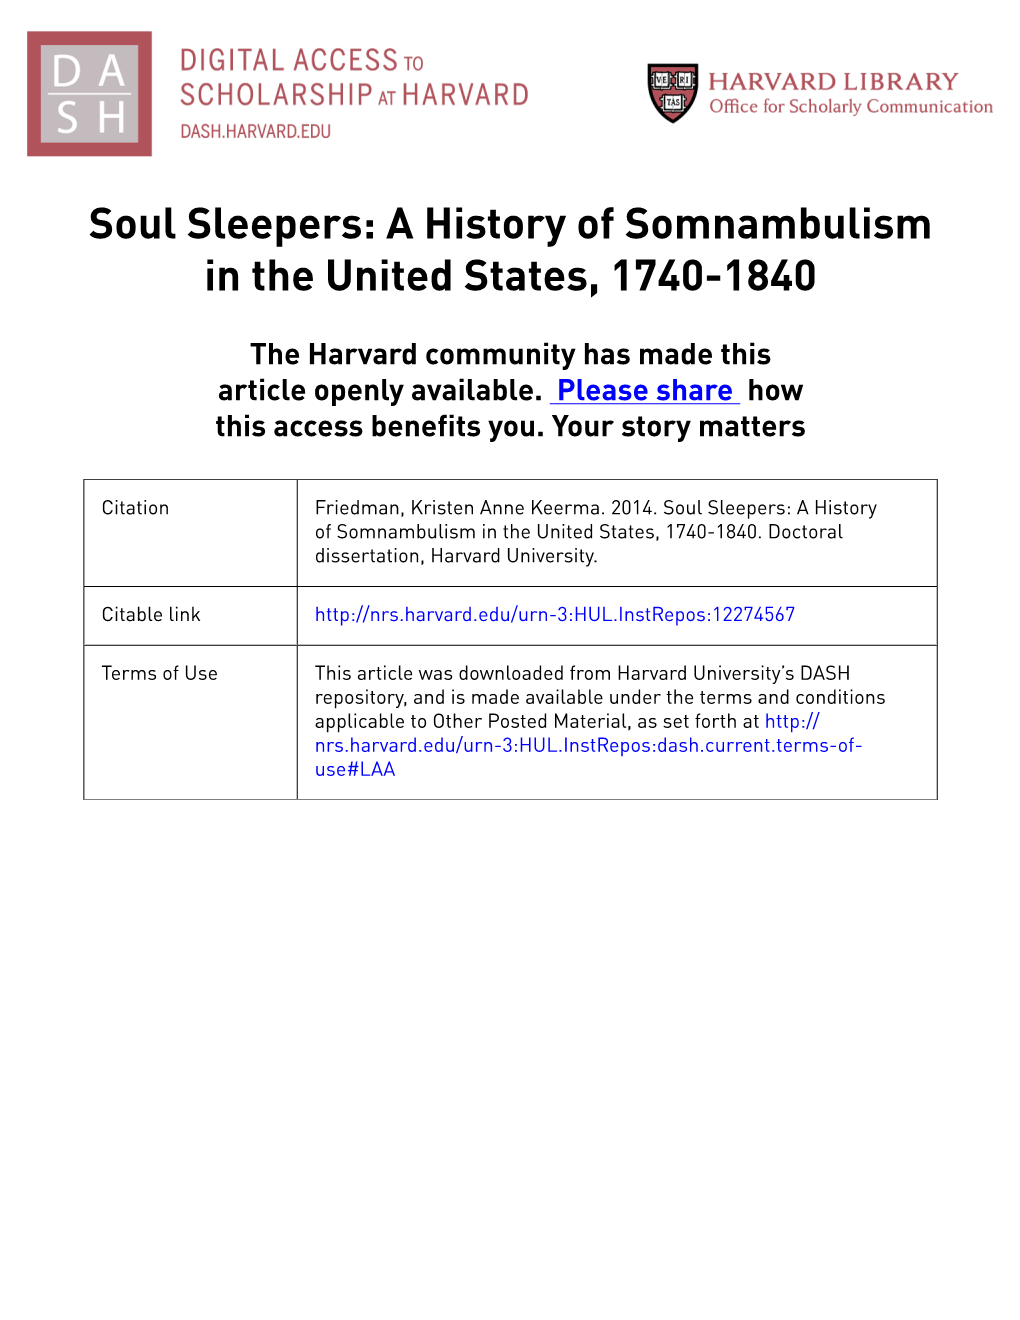 A History of Somnambulism in the United States, 1740-1840